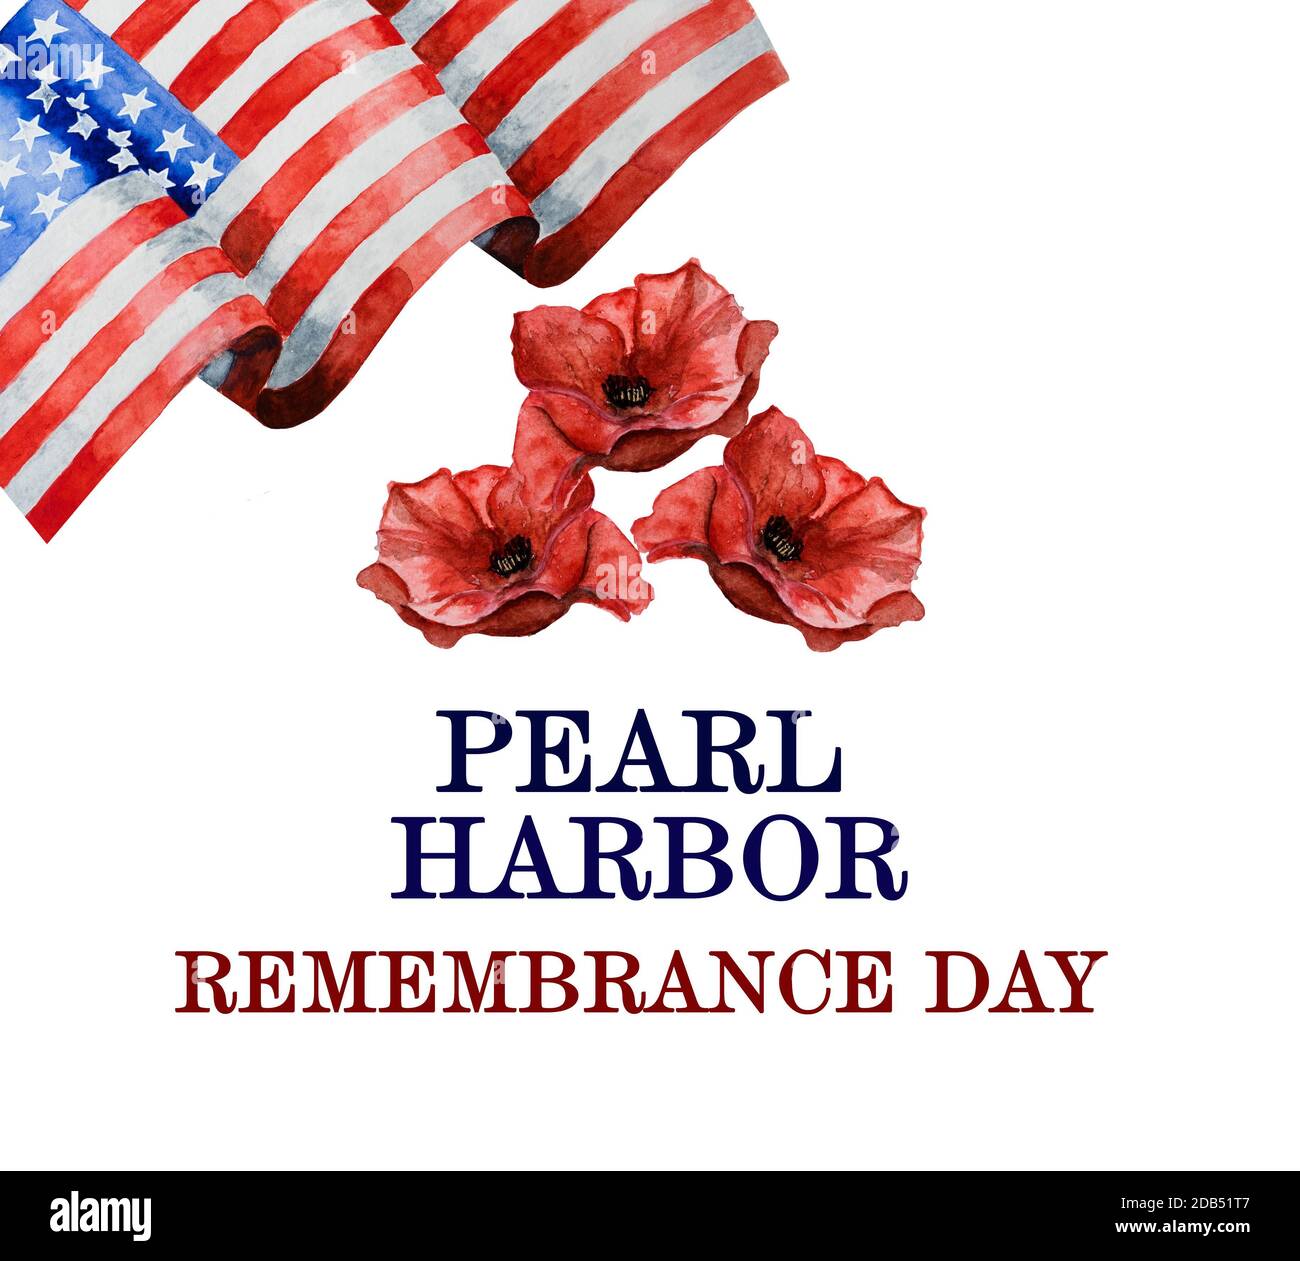 Pearl Harbor Remembrance Day. Greeting inscription. National holiday